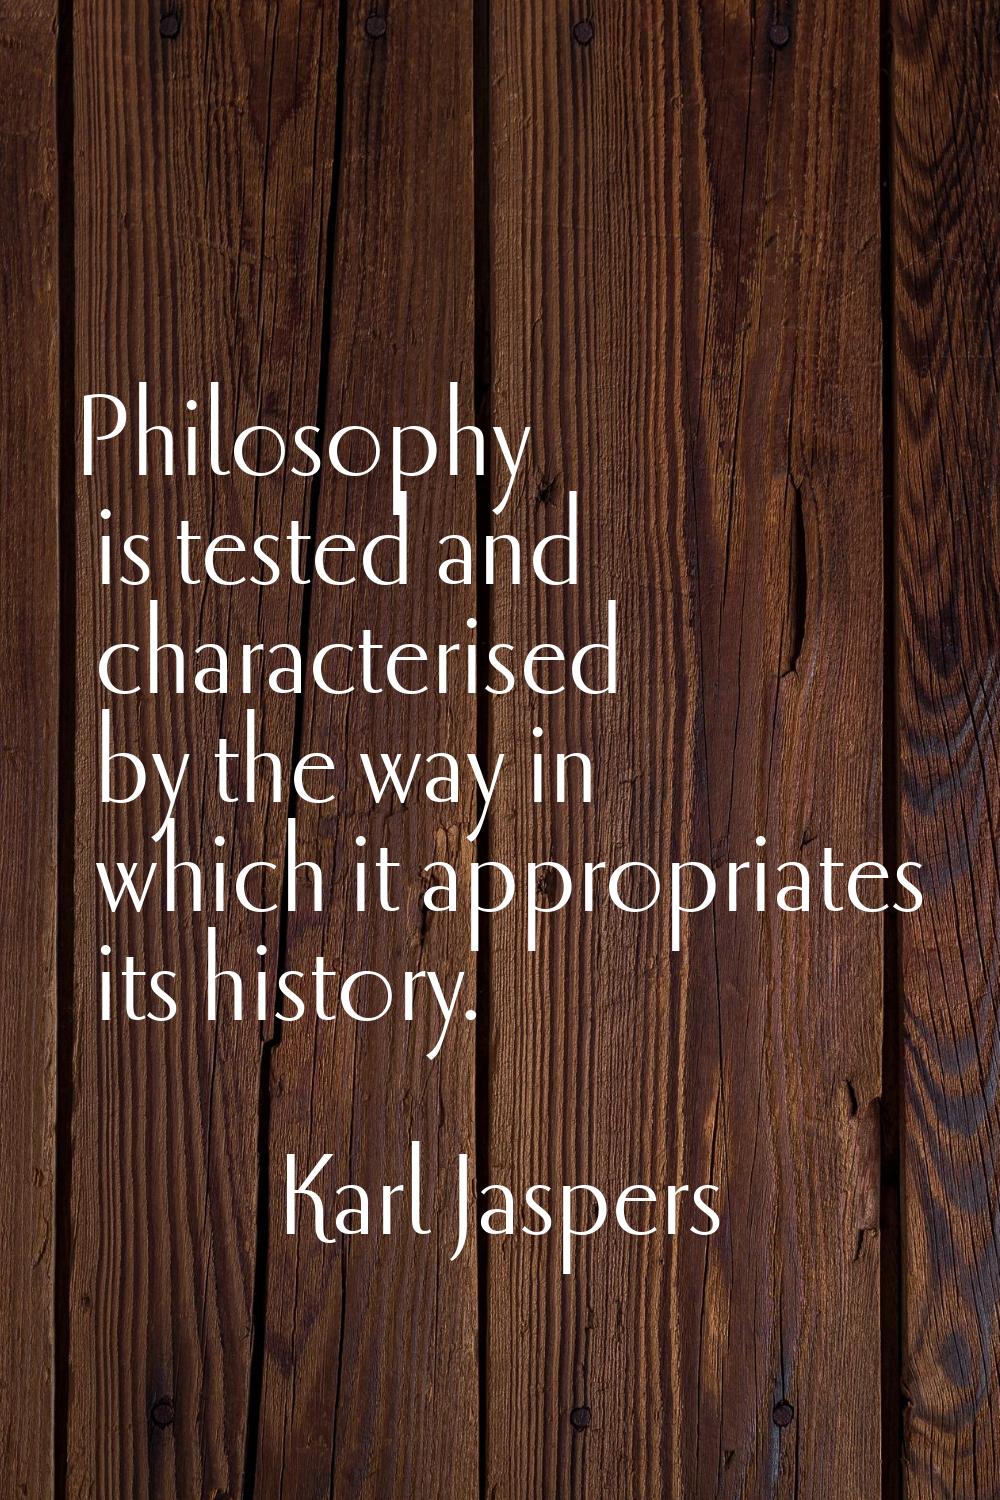 Philosophy is tested and characterised by the way in which it appropriates its history.